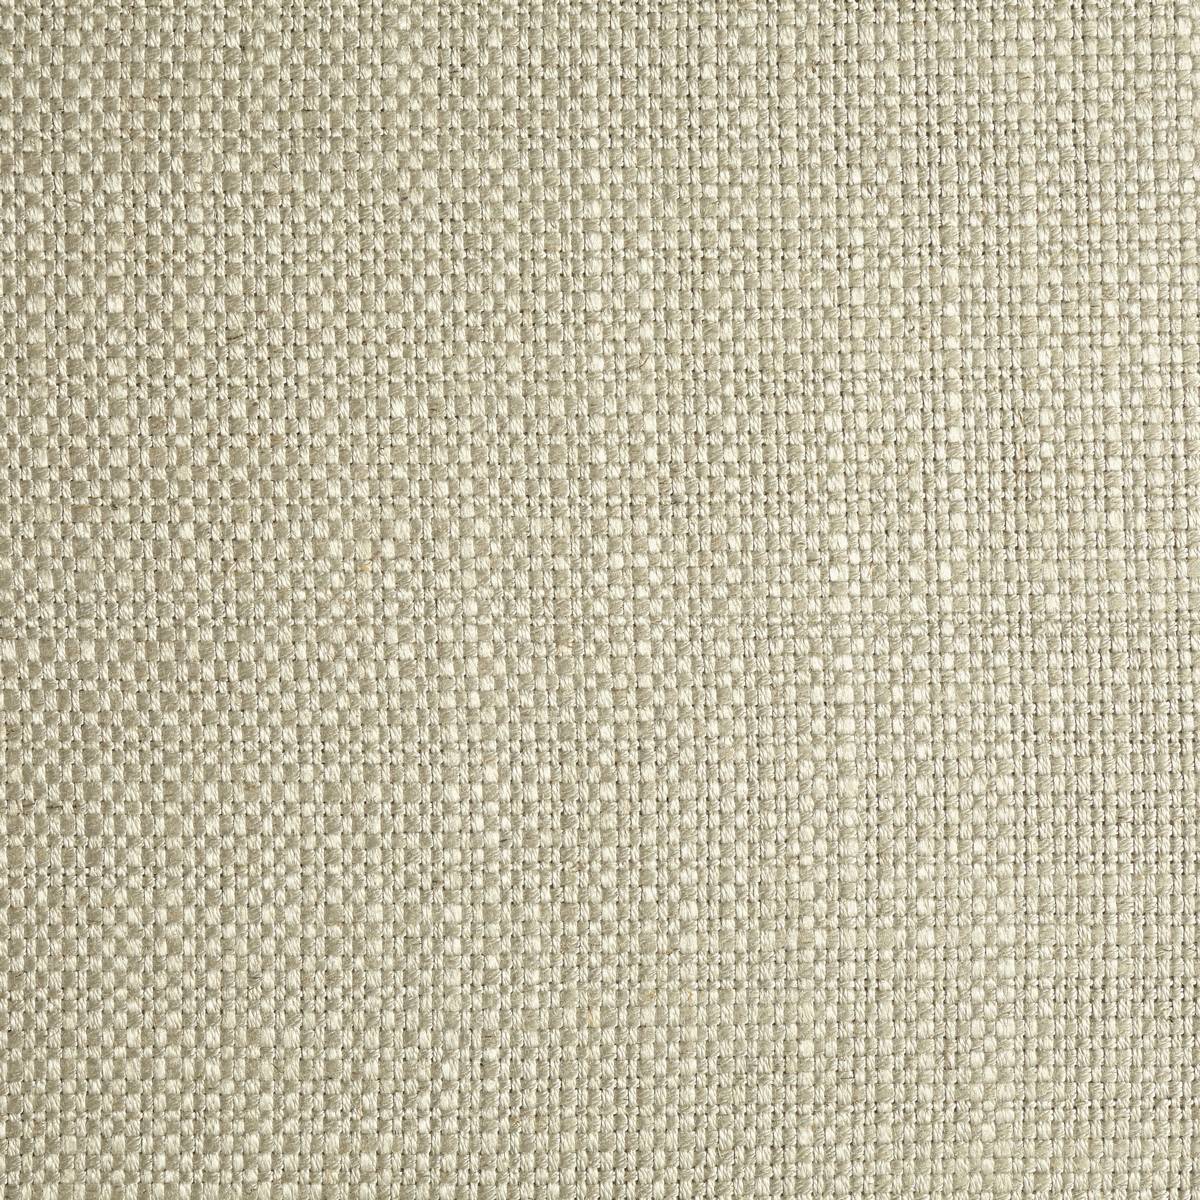 Lustre Mist Fabric by Zoffany